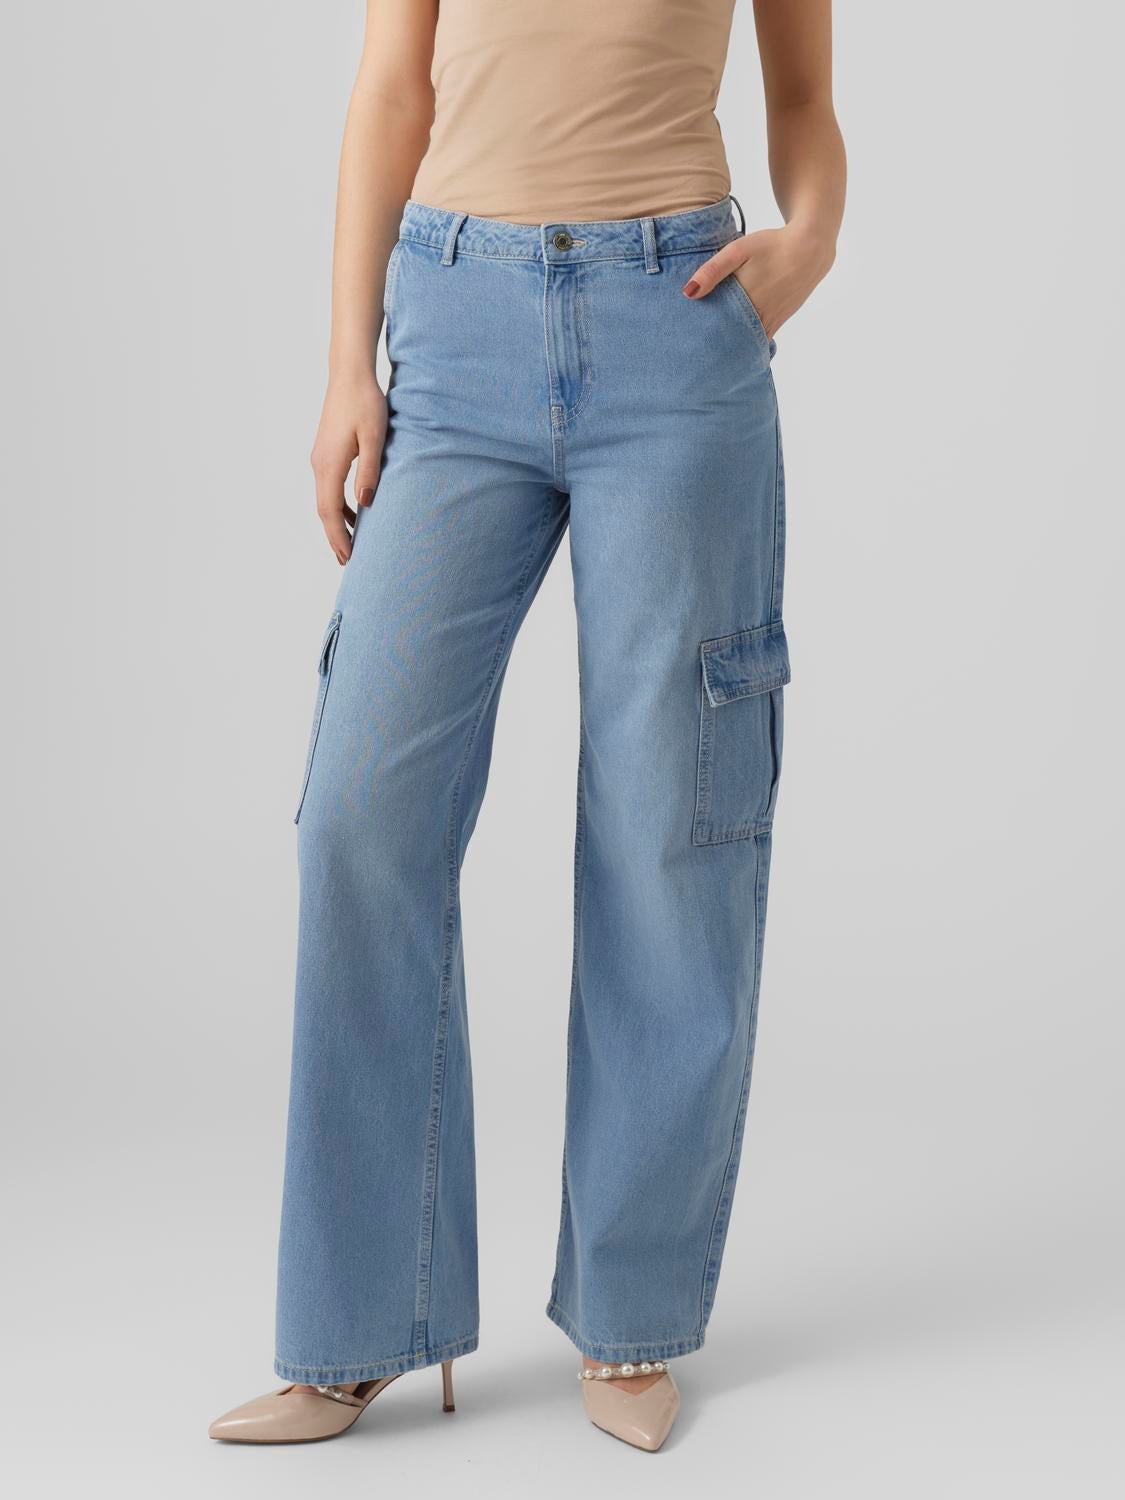 Loose Fit Jeans for Women | VERO MODA